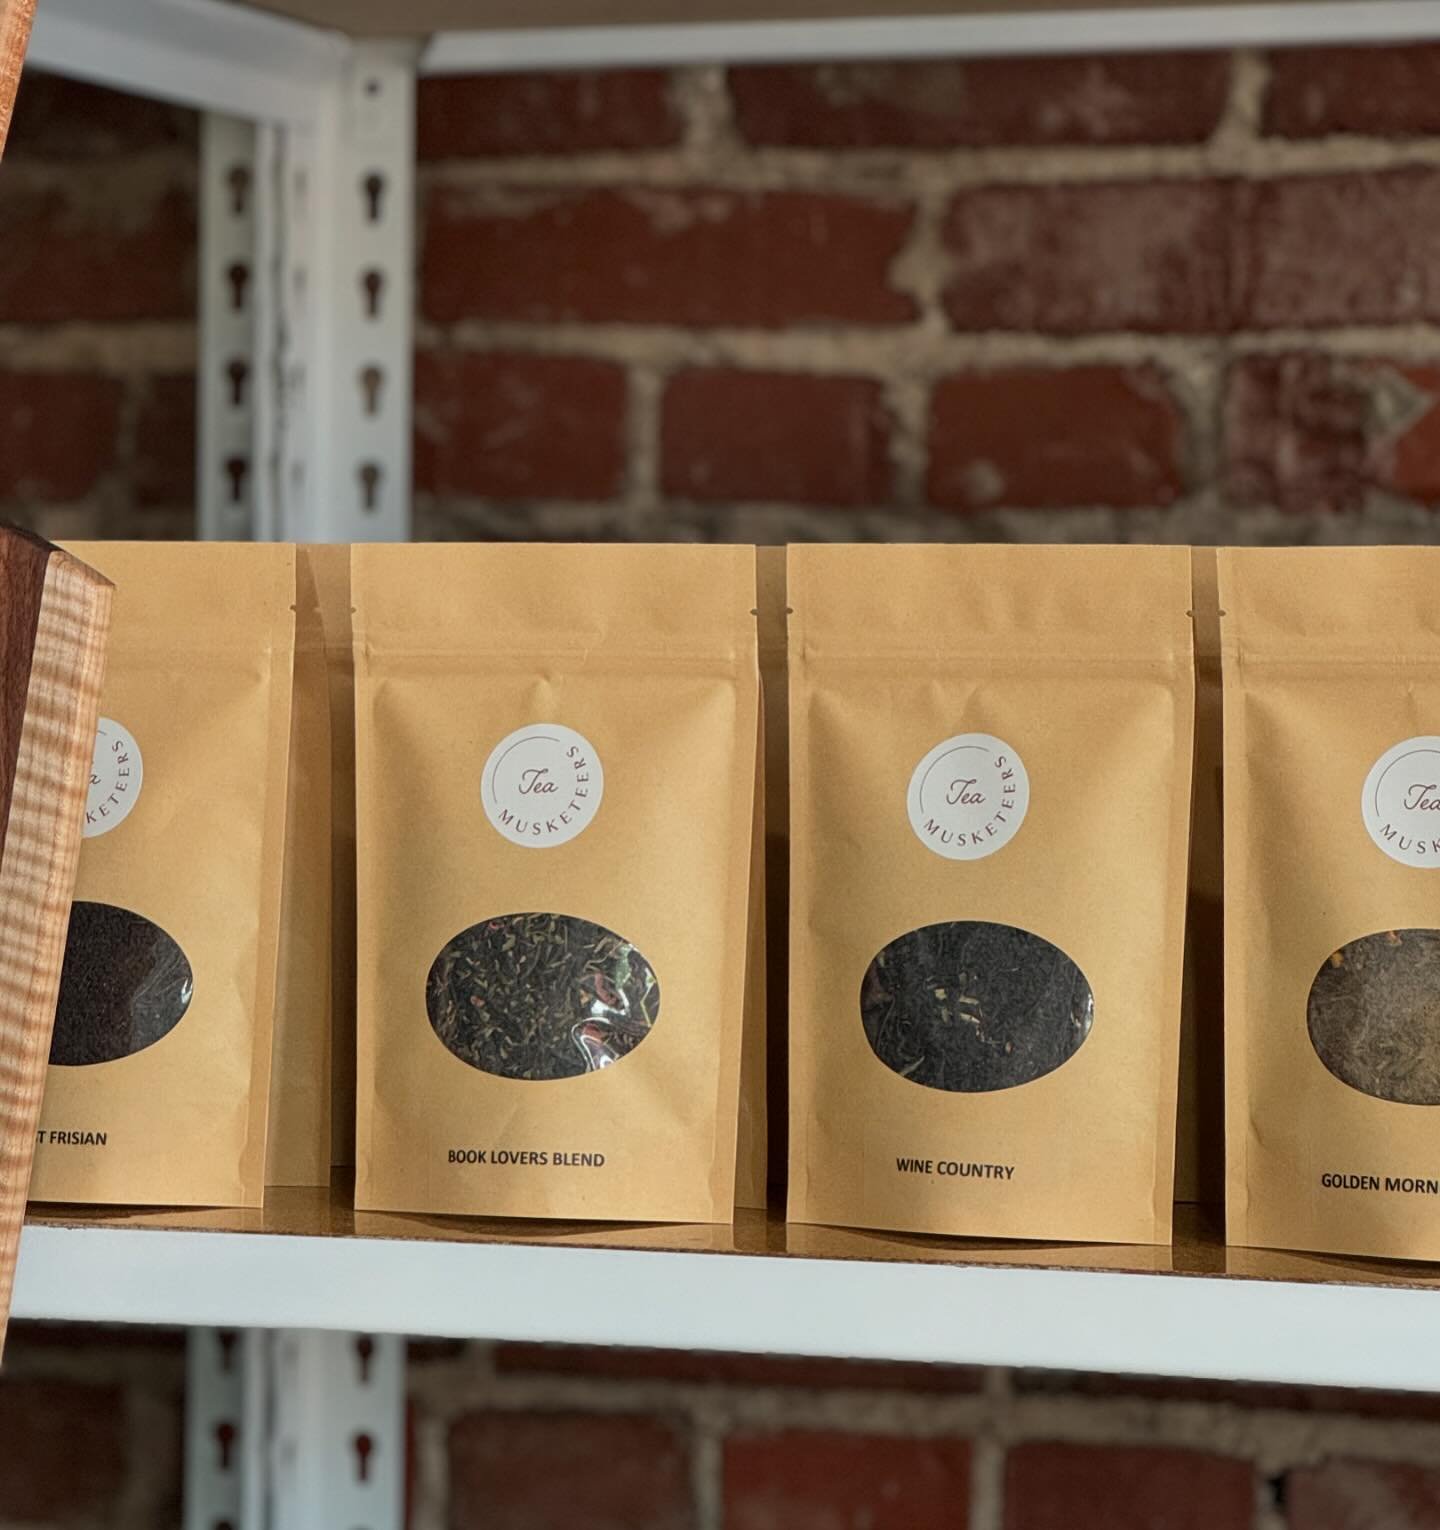 Now carrying @theteamusketeers loose leaf tea blends! We have Book Lovers Blend, Wine Country, Morning Golden Chai and East Frisian.